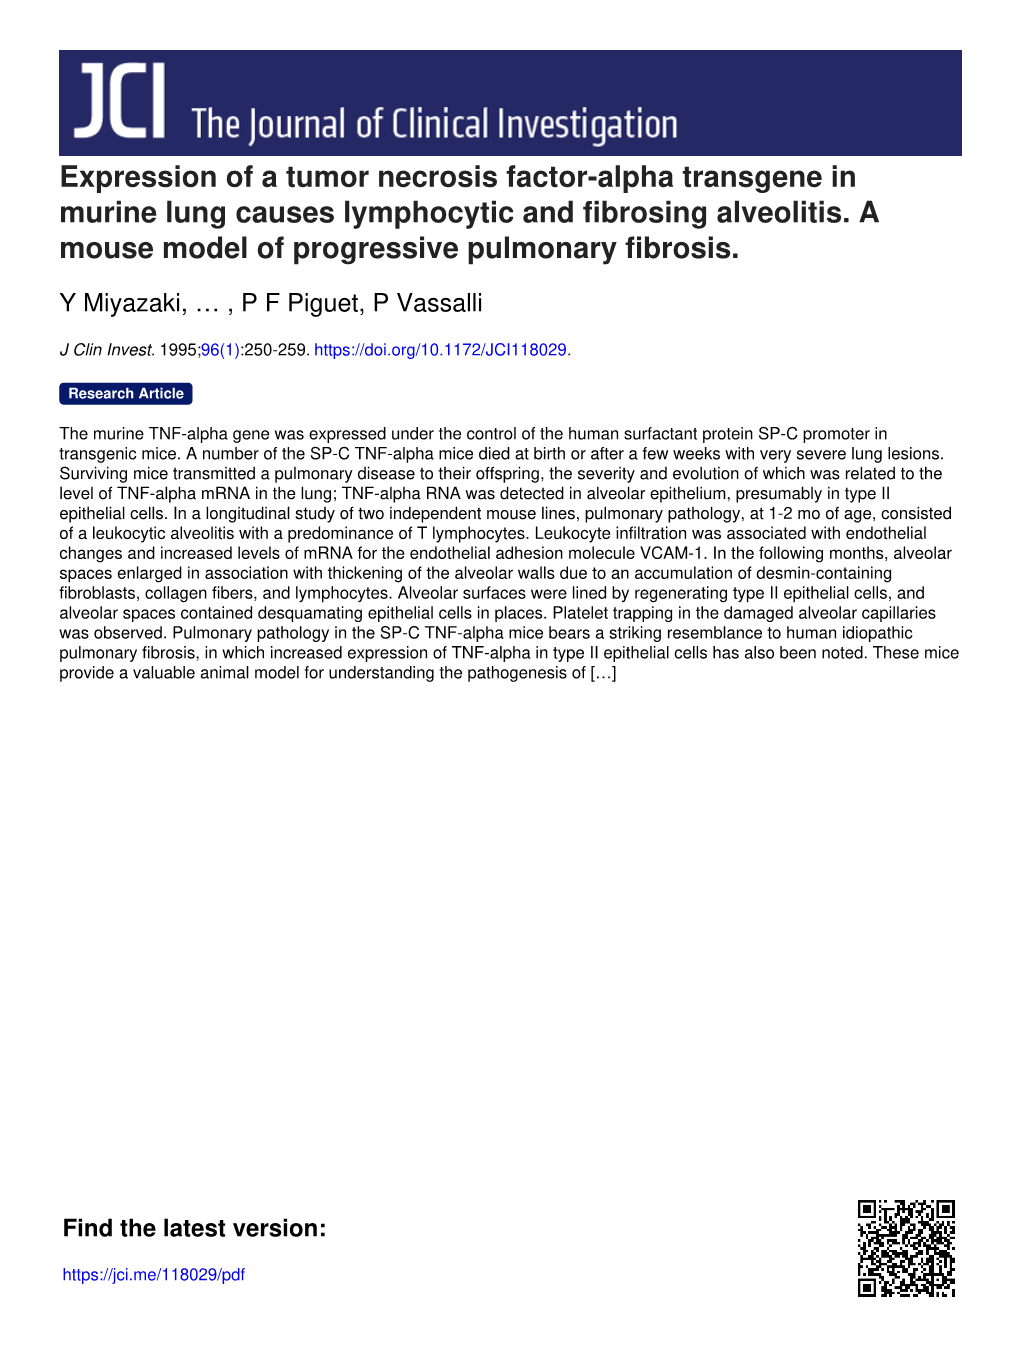 Expression of a Tumor Necrosis Factor-Alpha Transgene in Murine Lung Causes Lymphocytic and Fibrosing Alveolitis